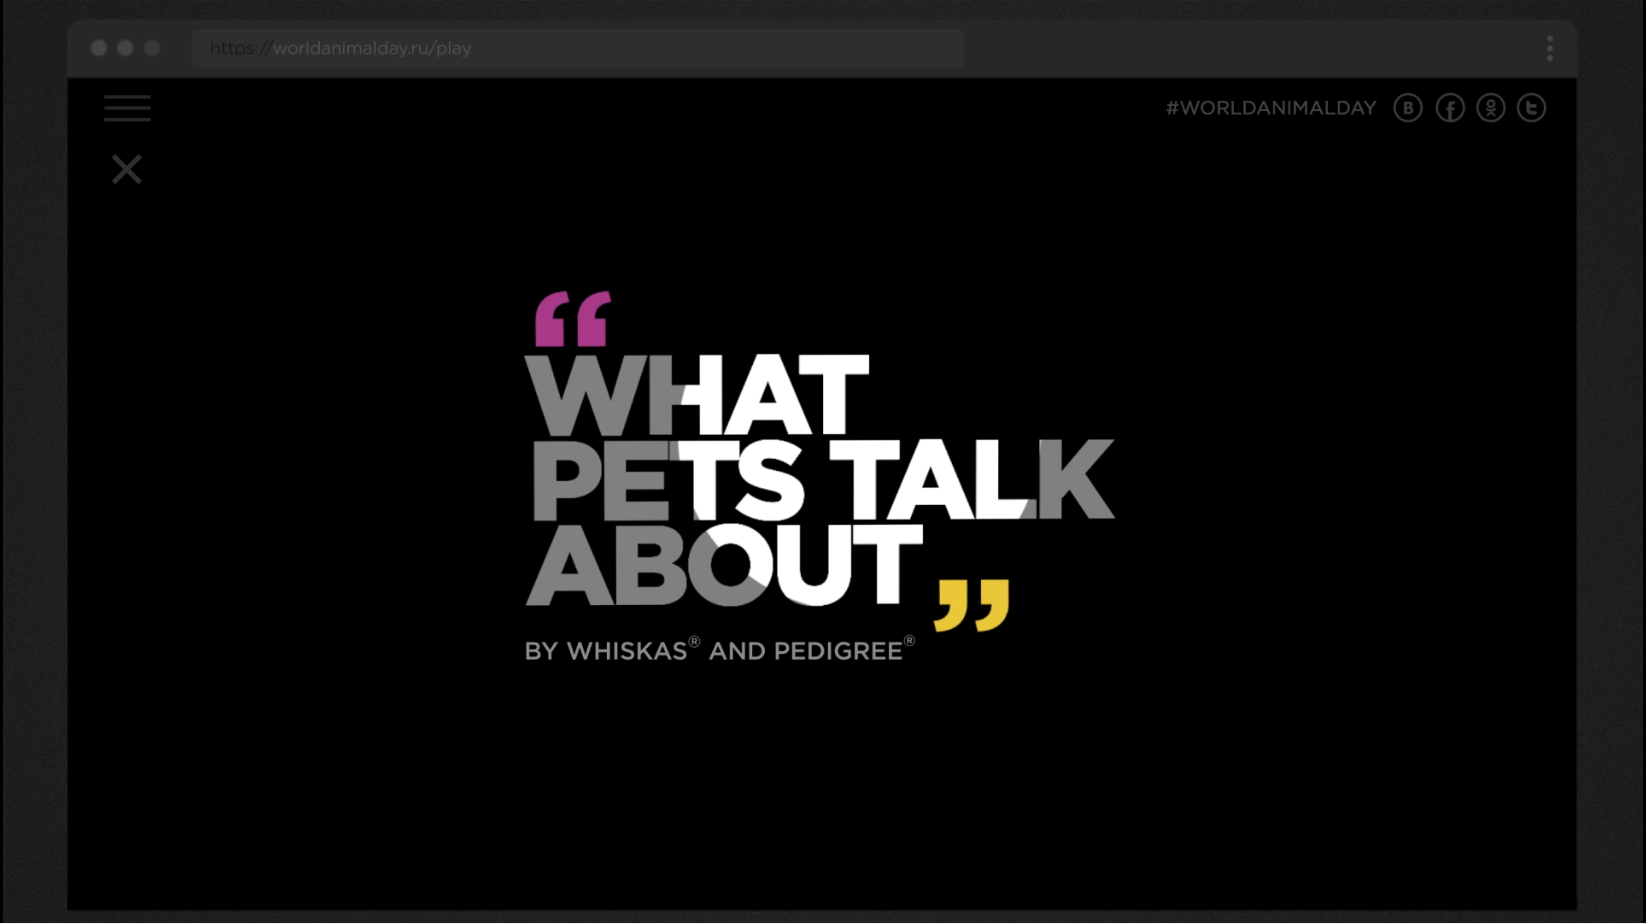 WHAT PETS TALK ABOUT